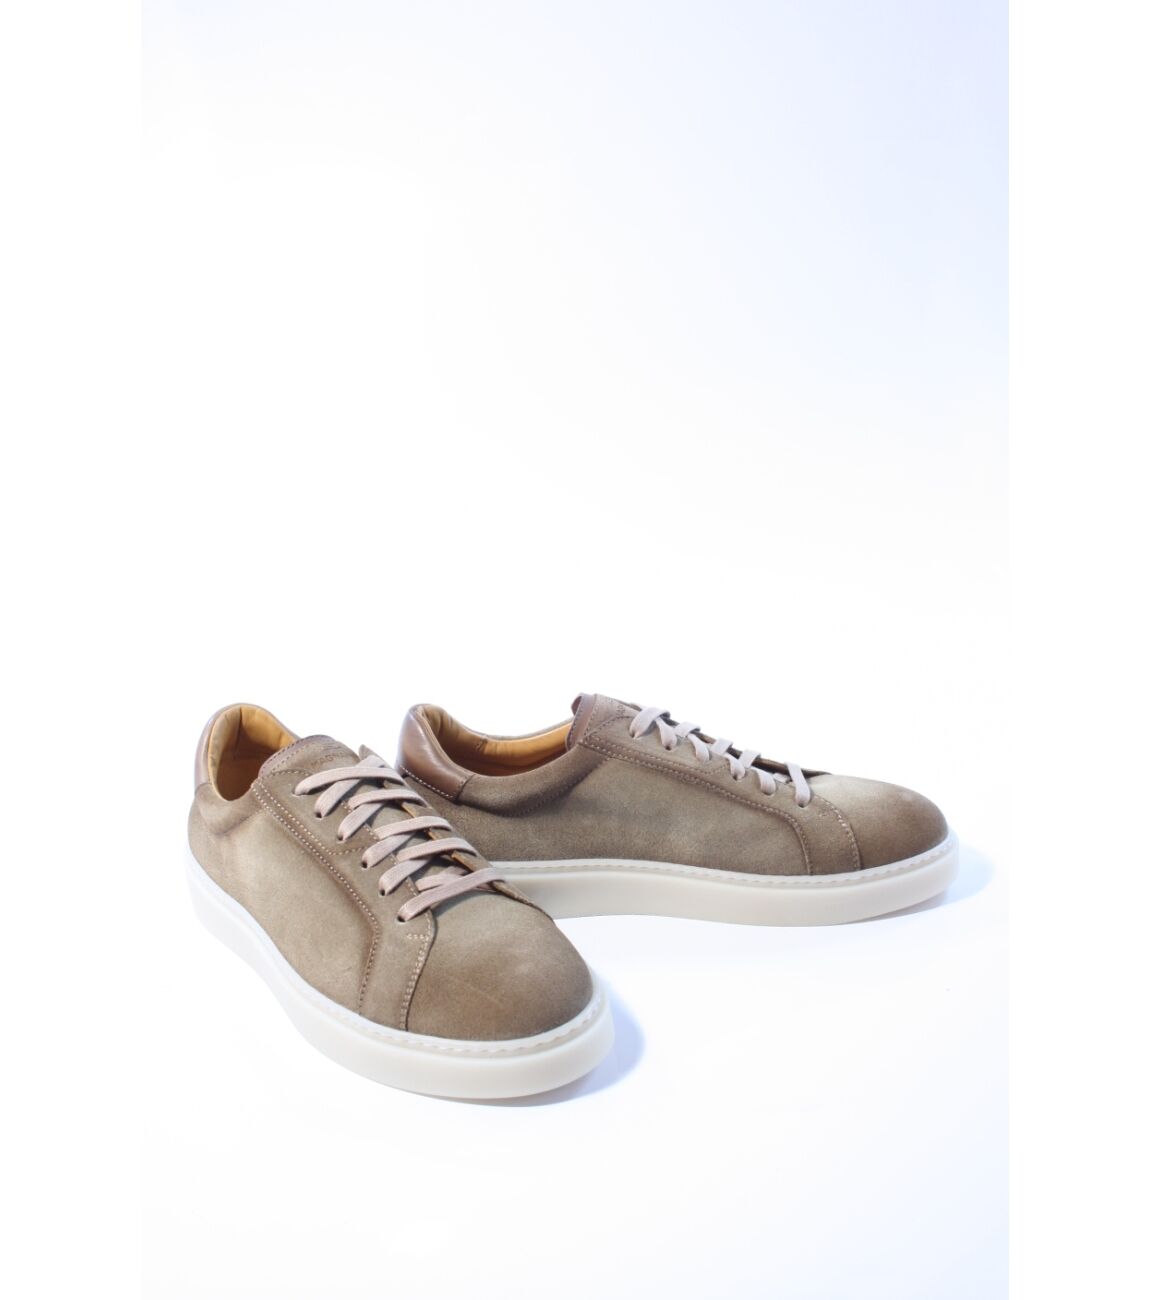 Magnanni Heren sneakers taupe 42.5